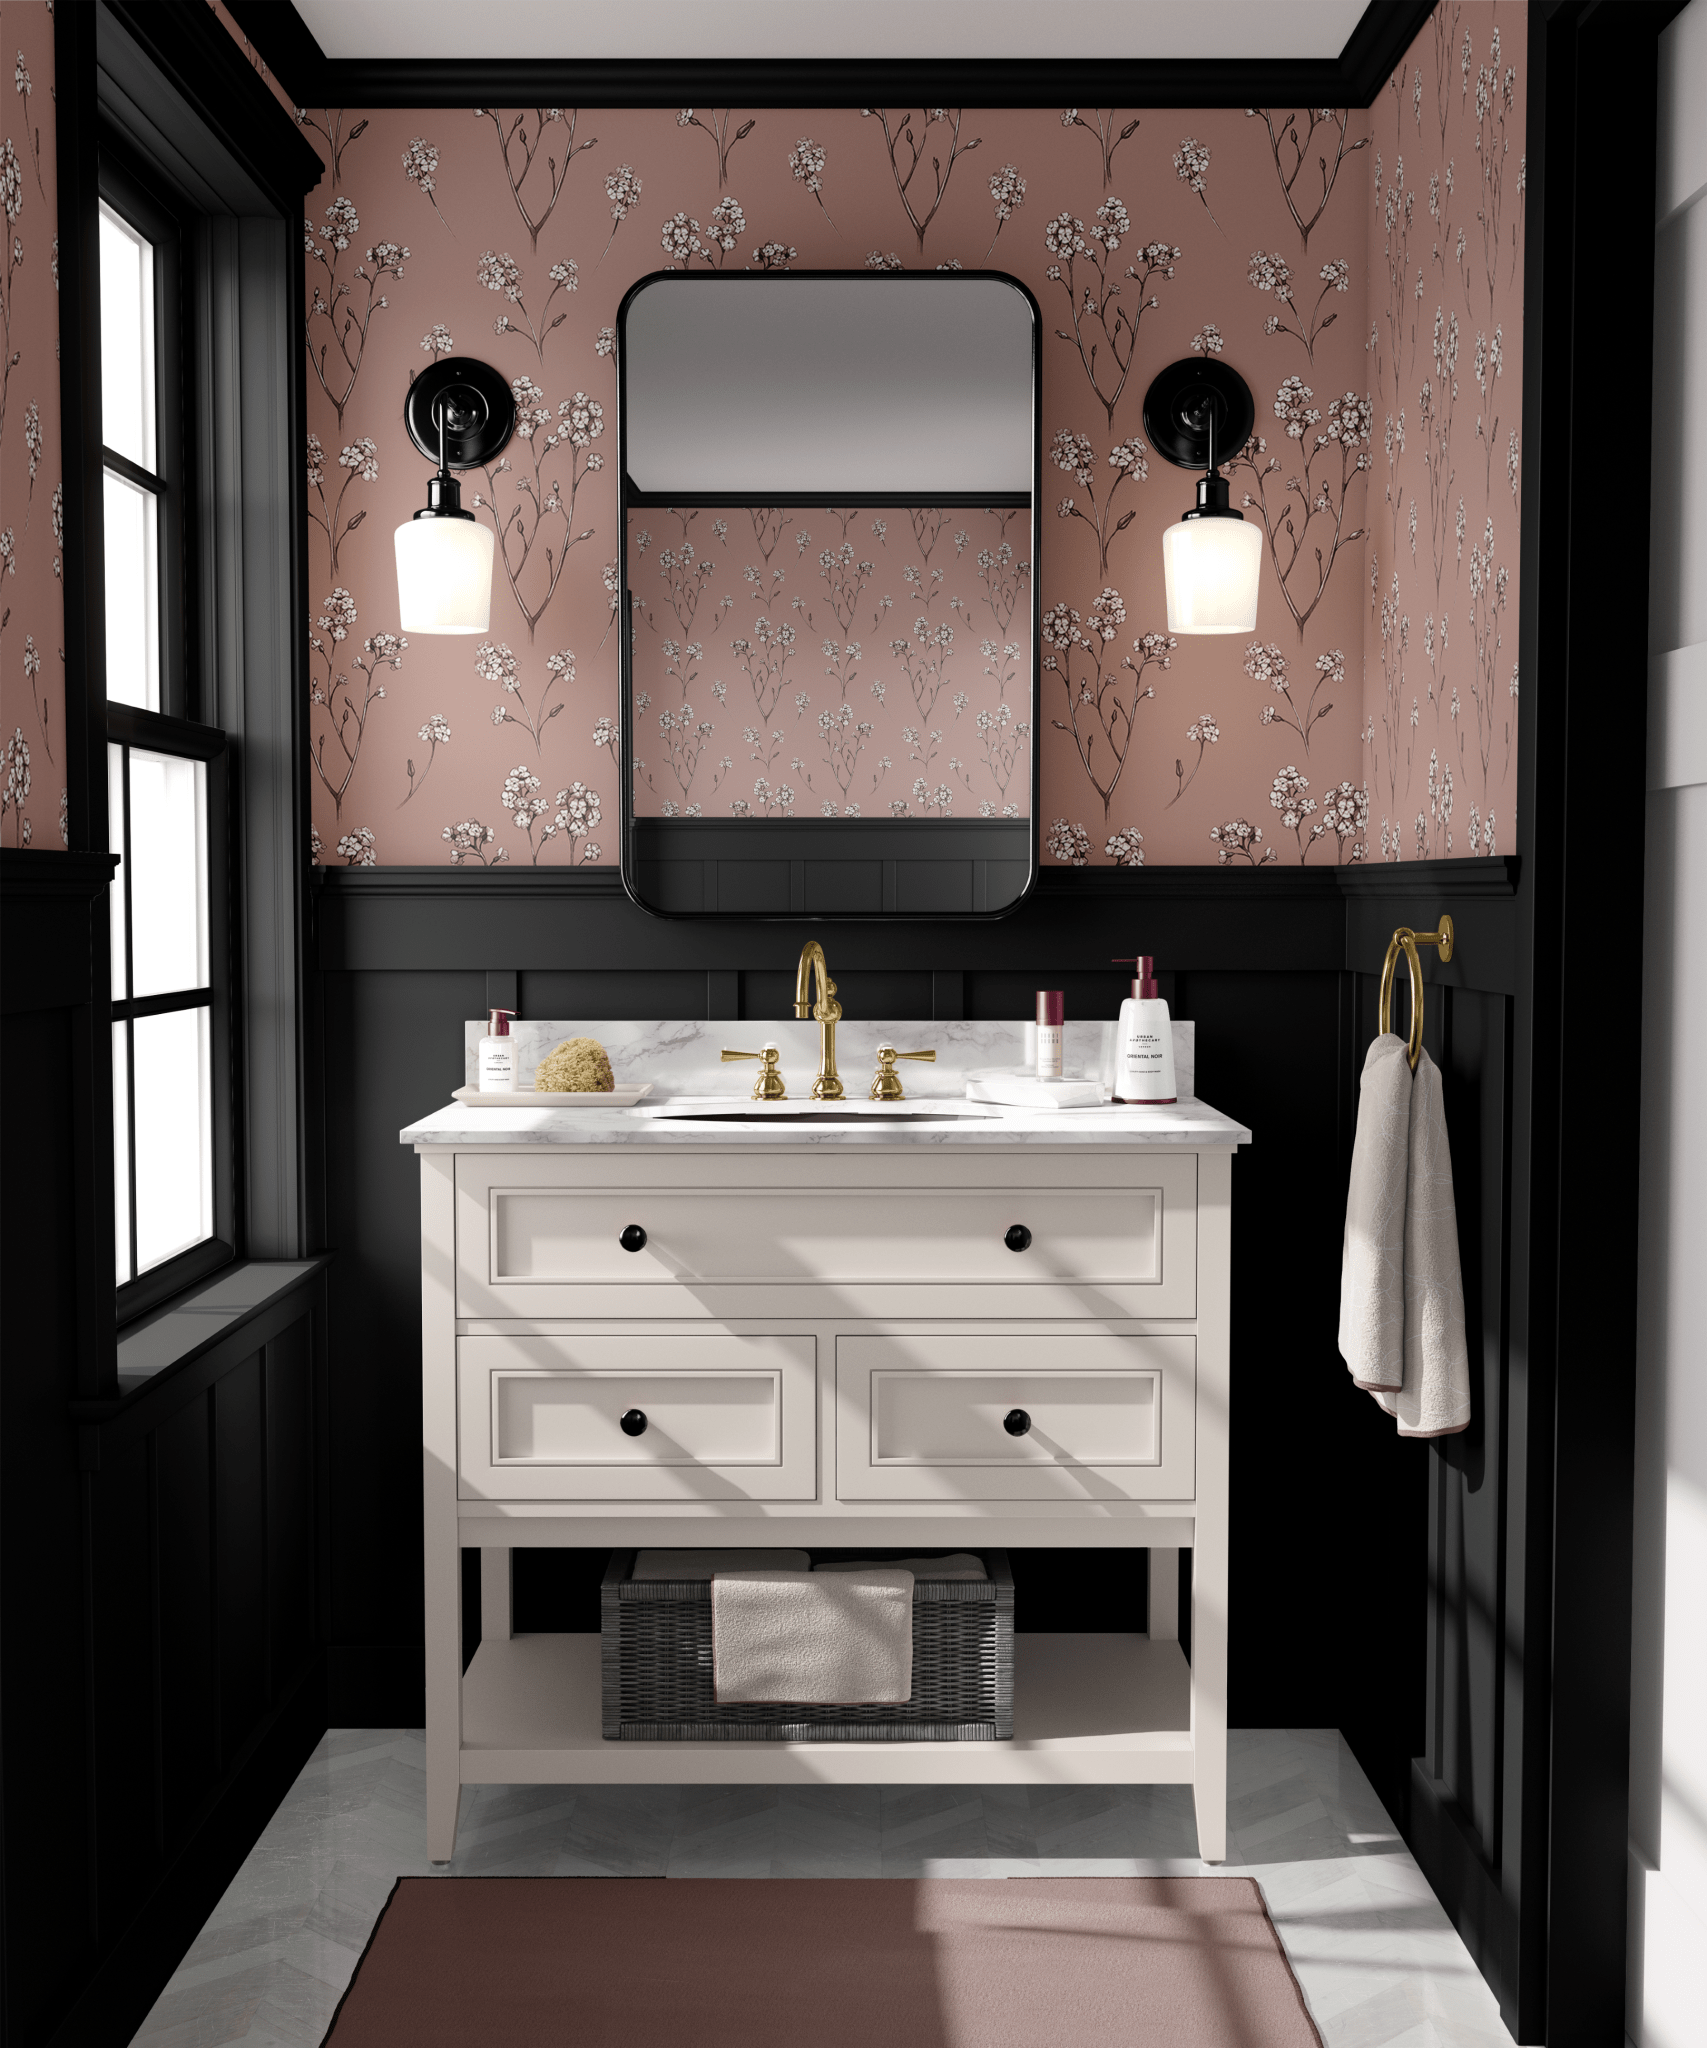 A chic bathroom interior featuring terracotta thornhill floral wallpaper that complements the dark trim and white furnishings.